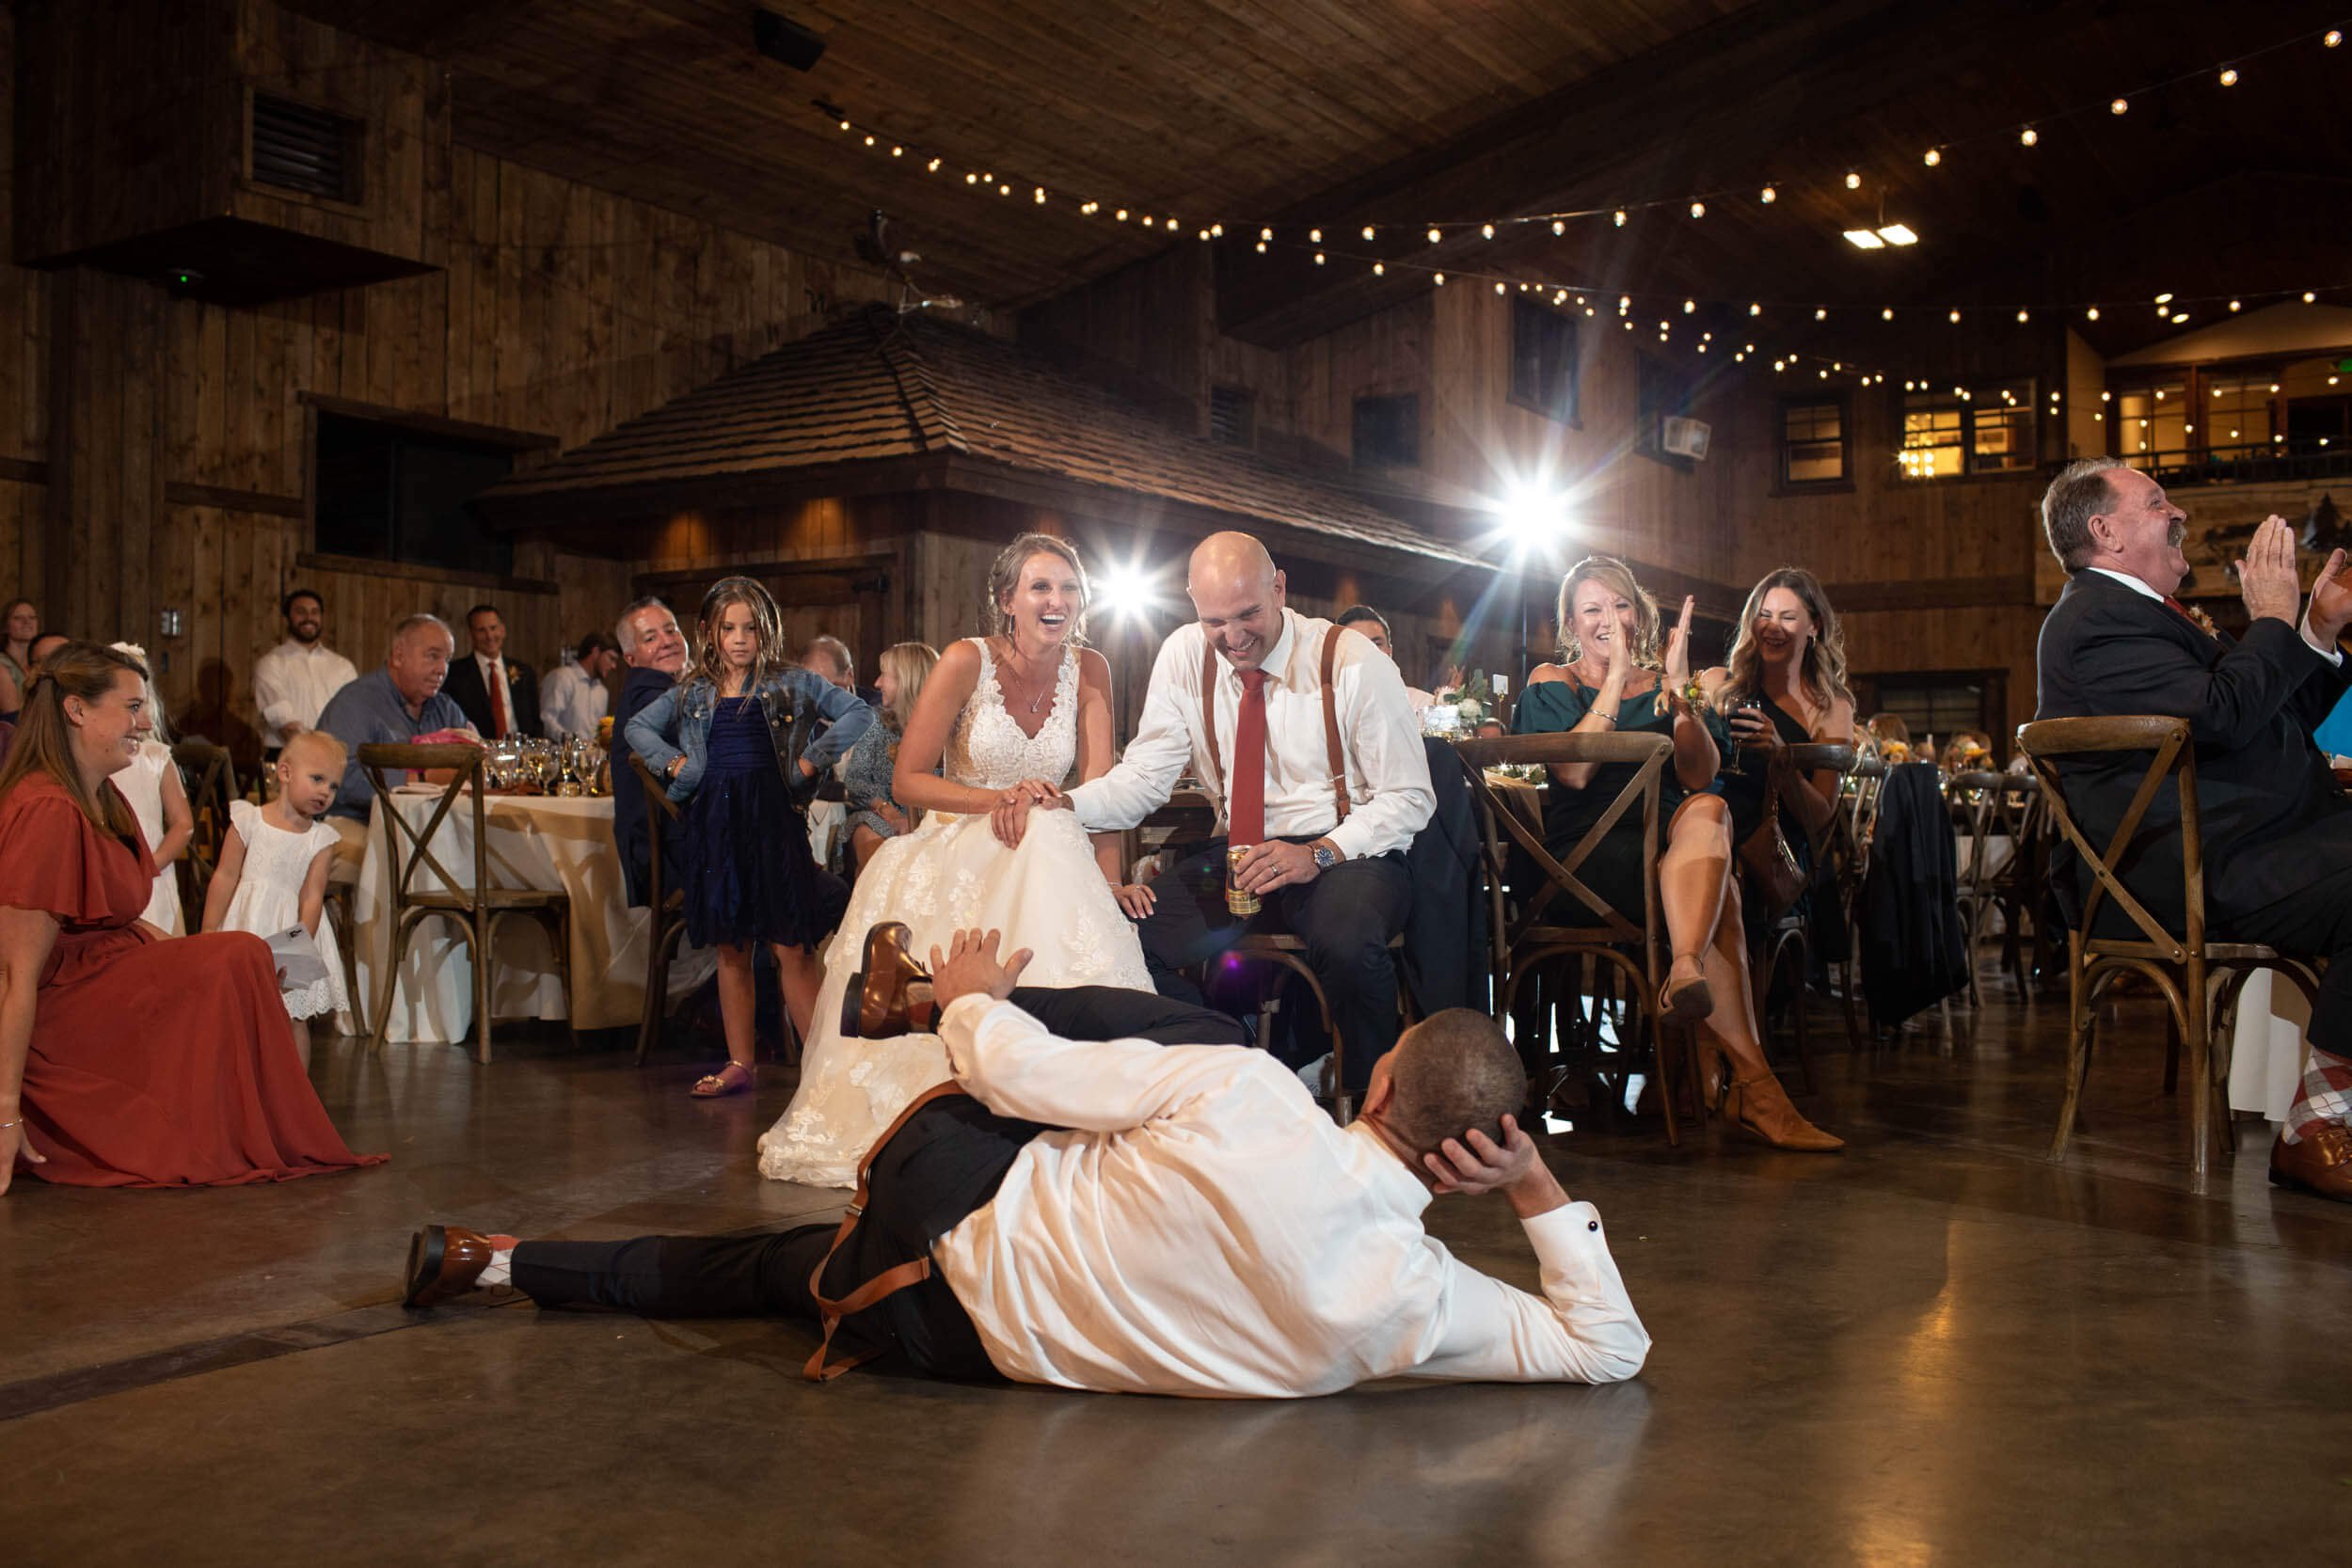 Candid Dancing Photos at a Wedding Reception  in Colorado by CliftonMarie Photography